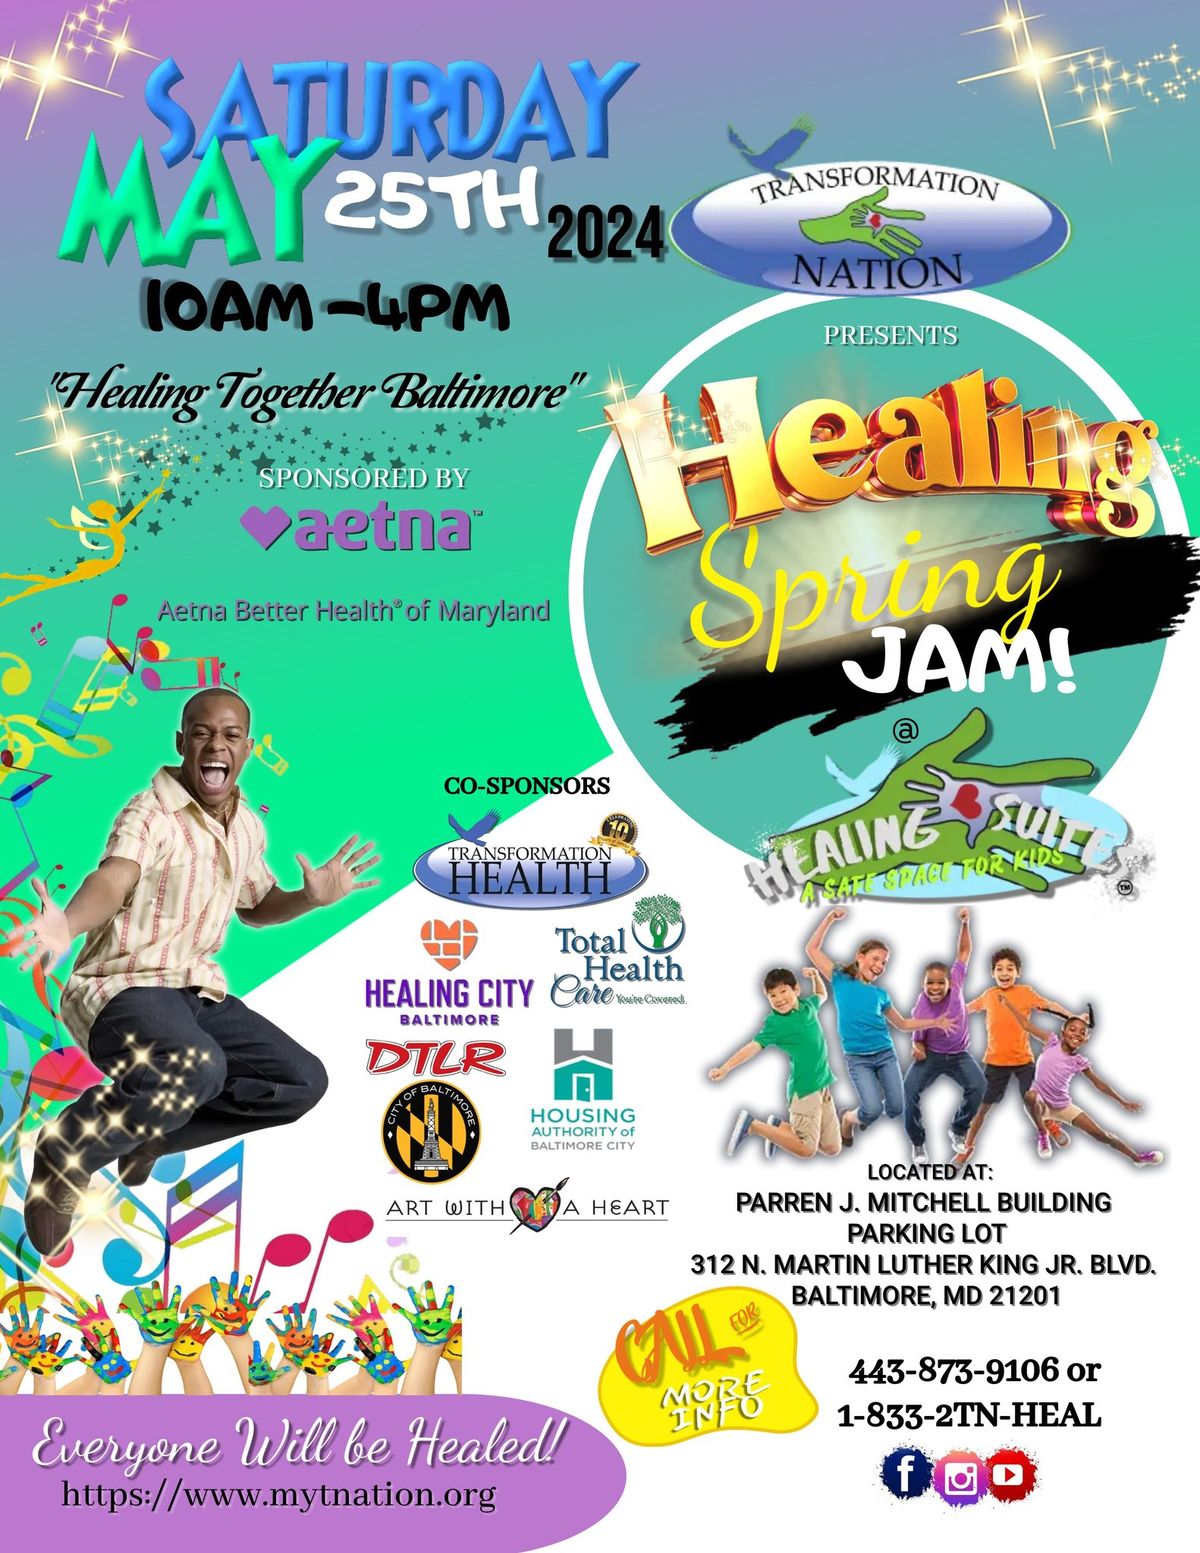 The 1st Annual Healing Spring Jam